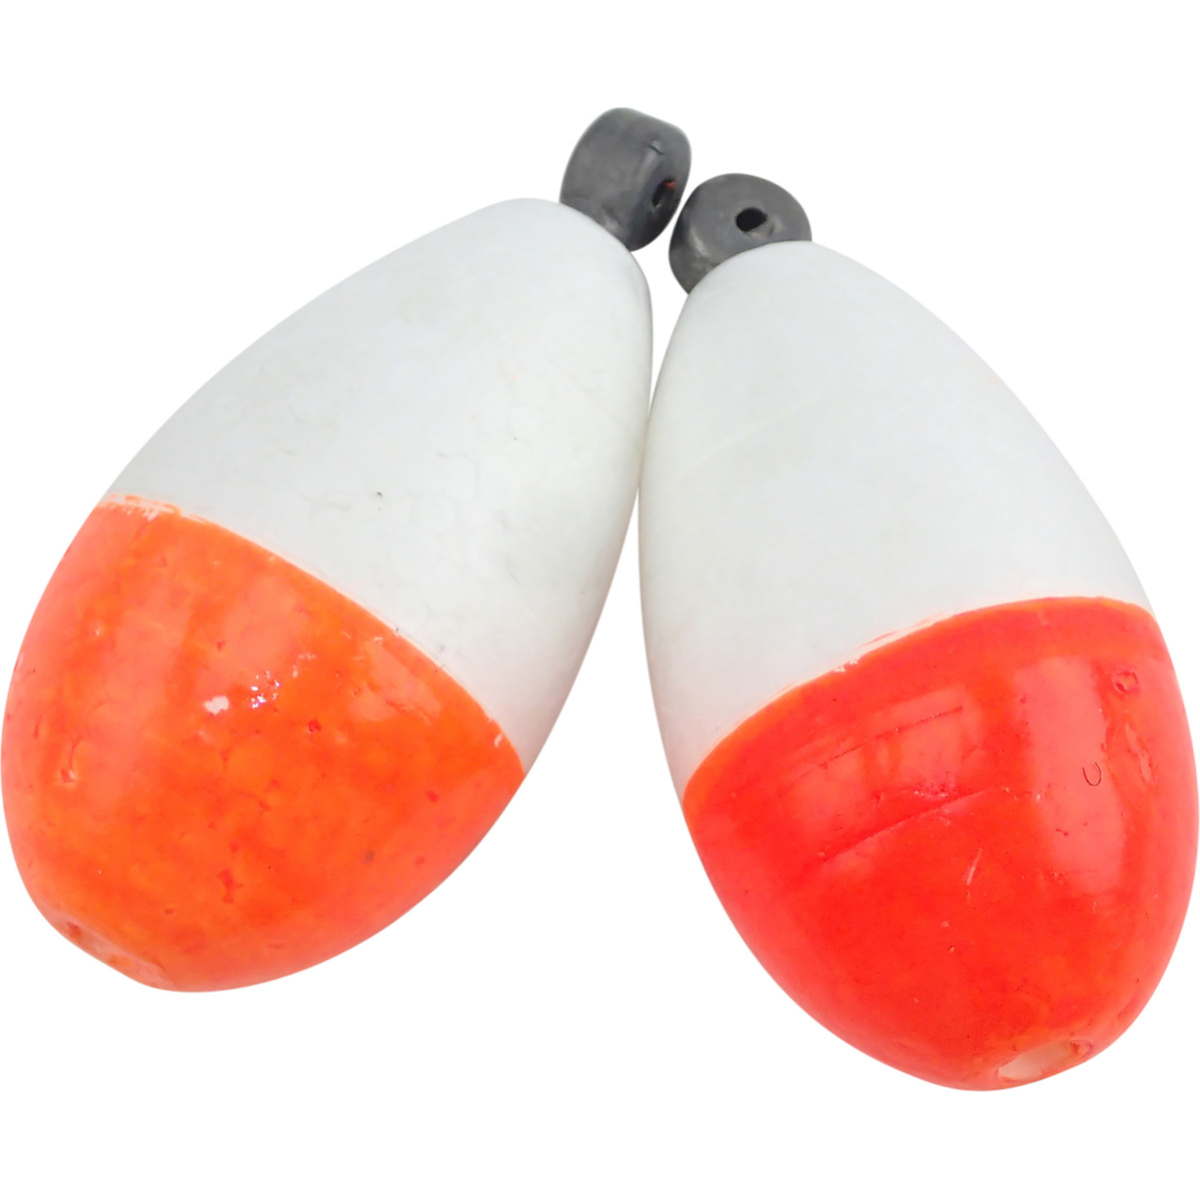 Photo of Amish Outfitters Weighted Slip Floats for sale at United Tackle Shops.